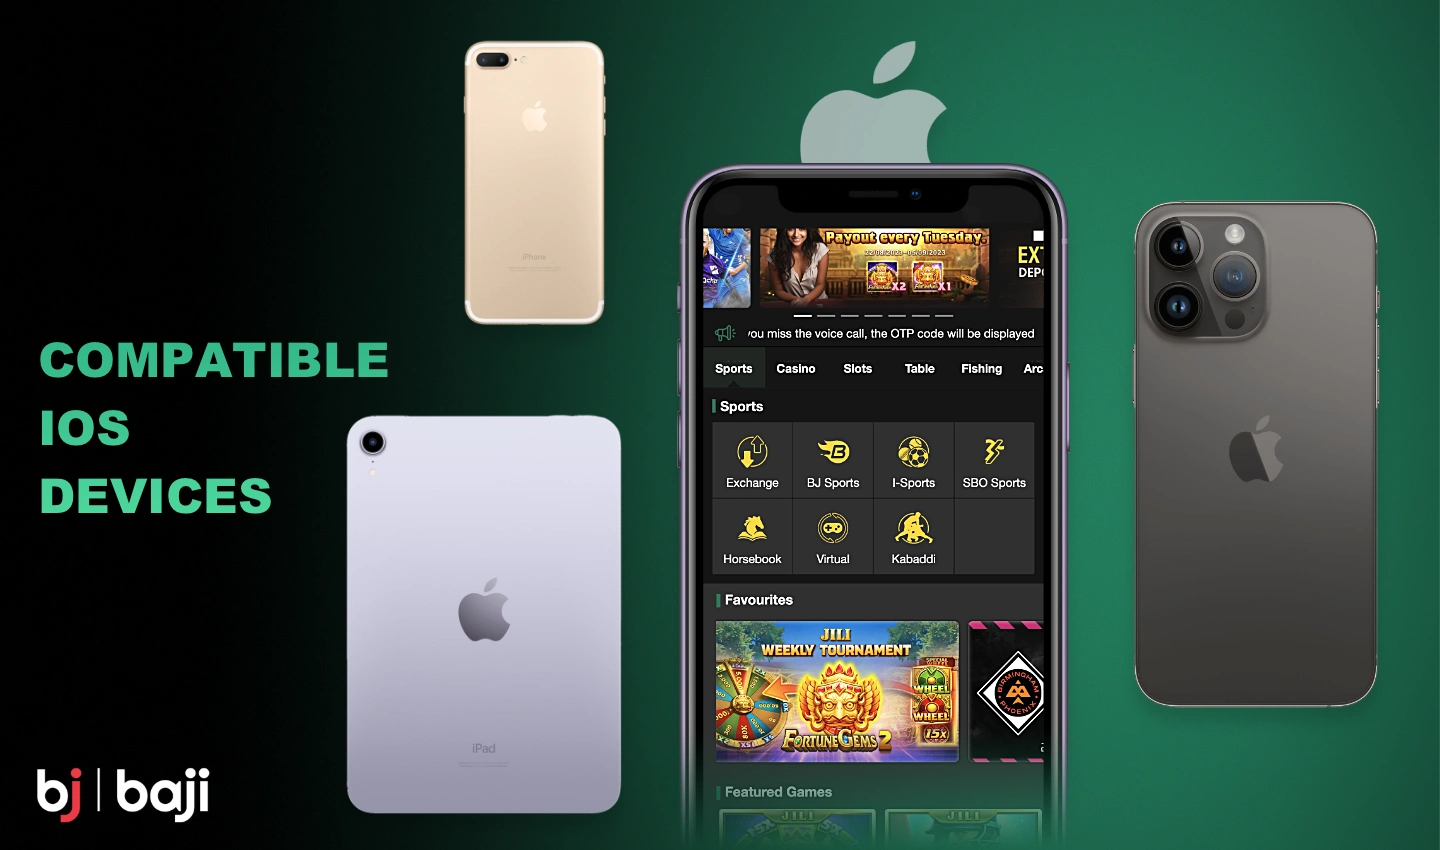 Baji's iOS mobile app is compatible with most Apple devices